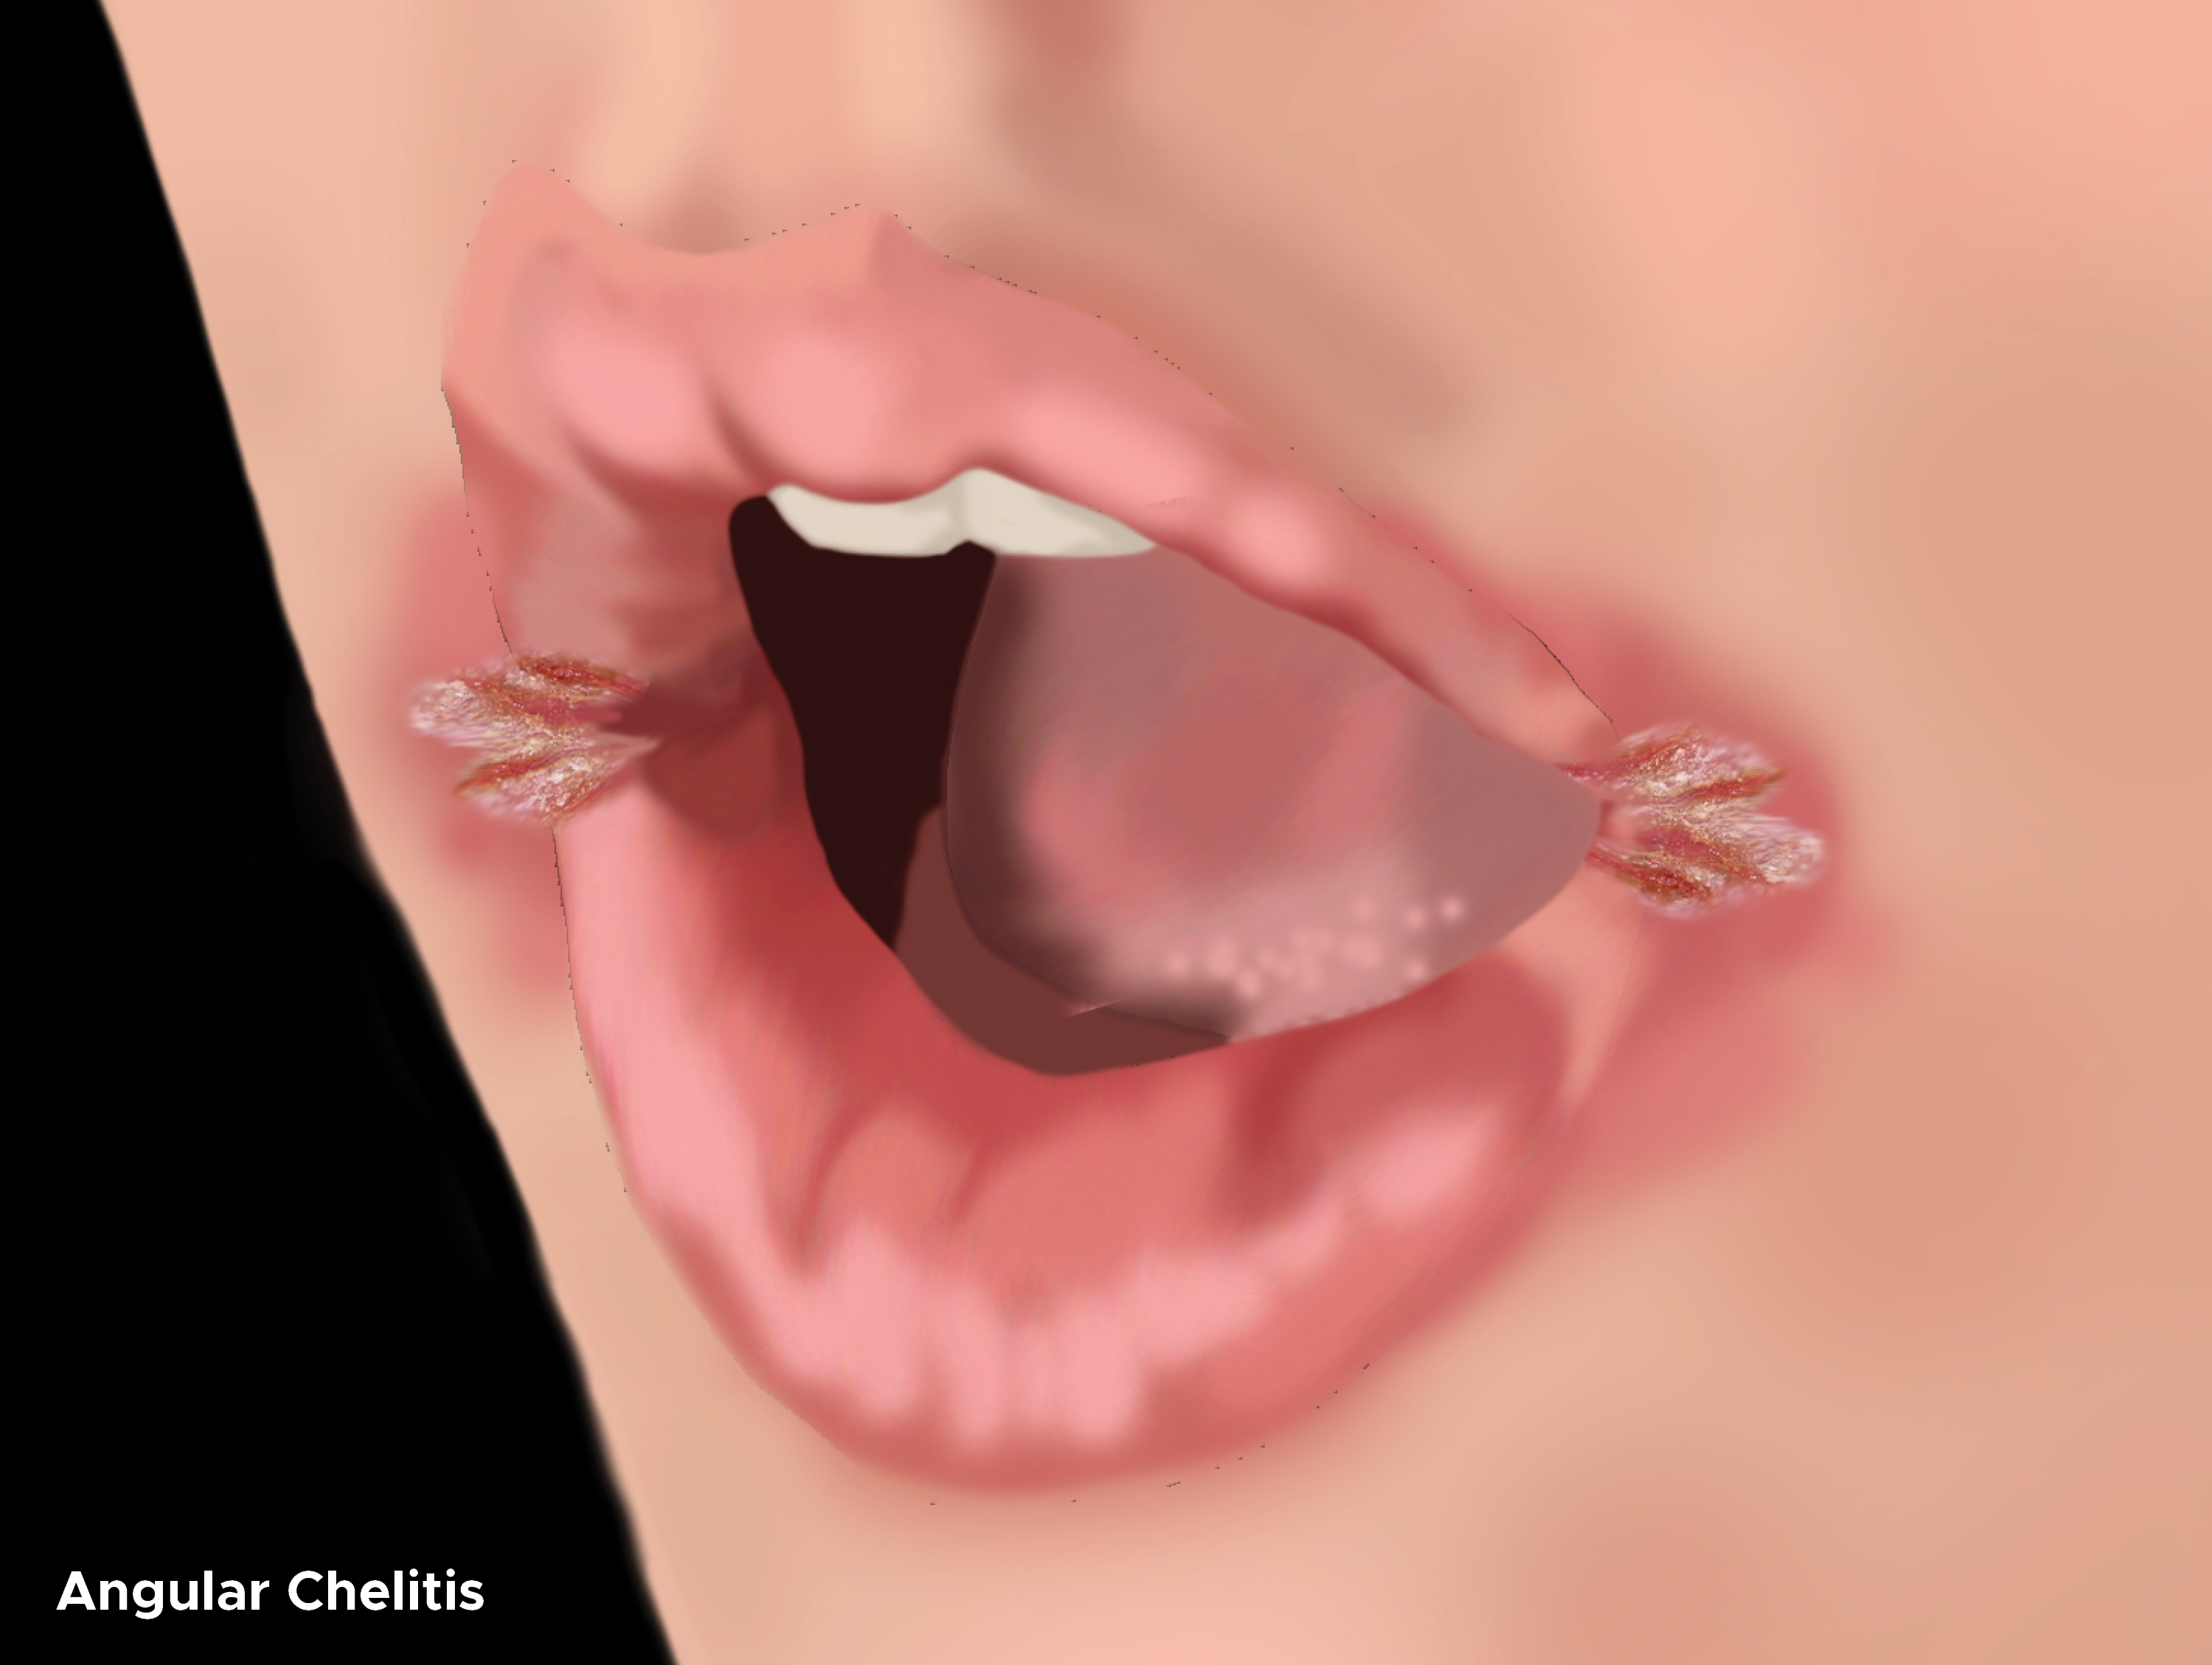 Illustration of cracks in corners of mouth due to angular chelitis. 